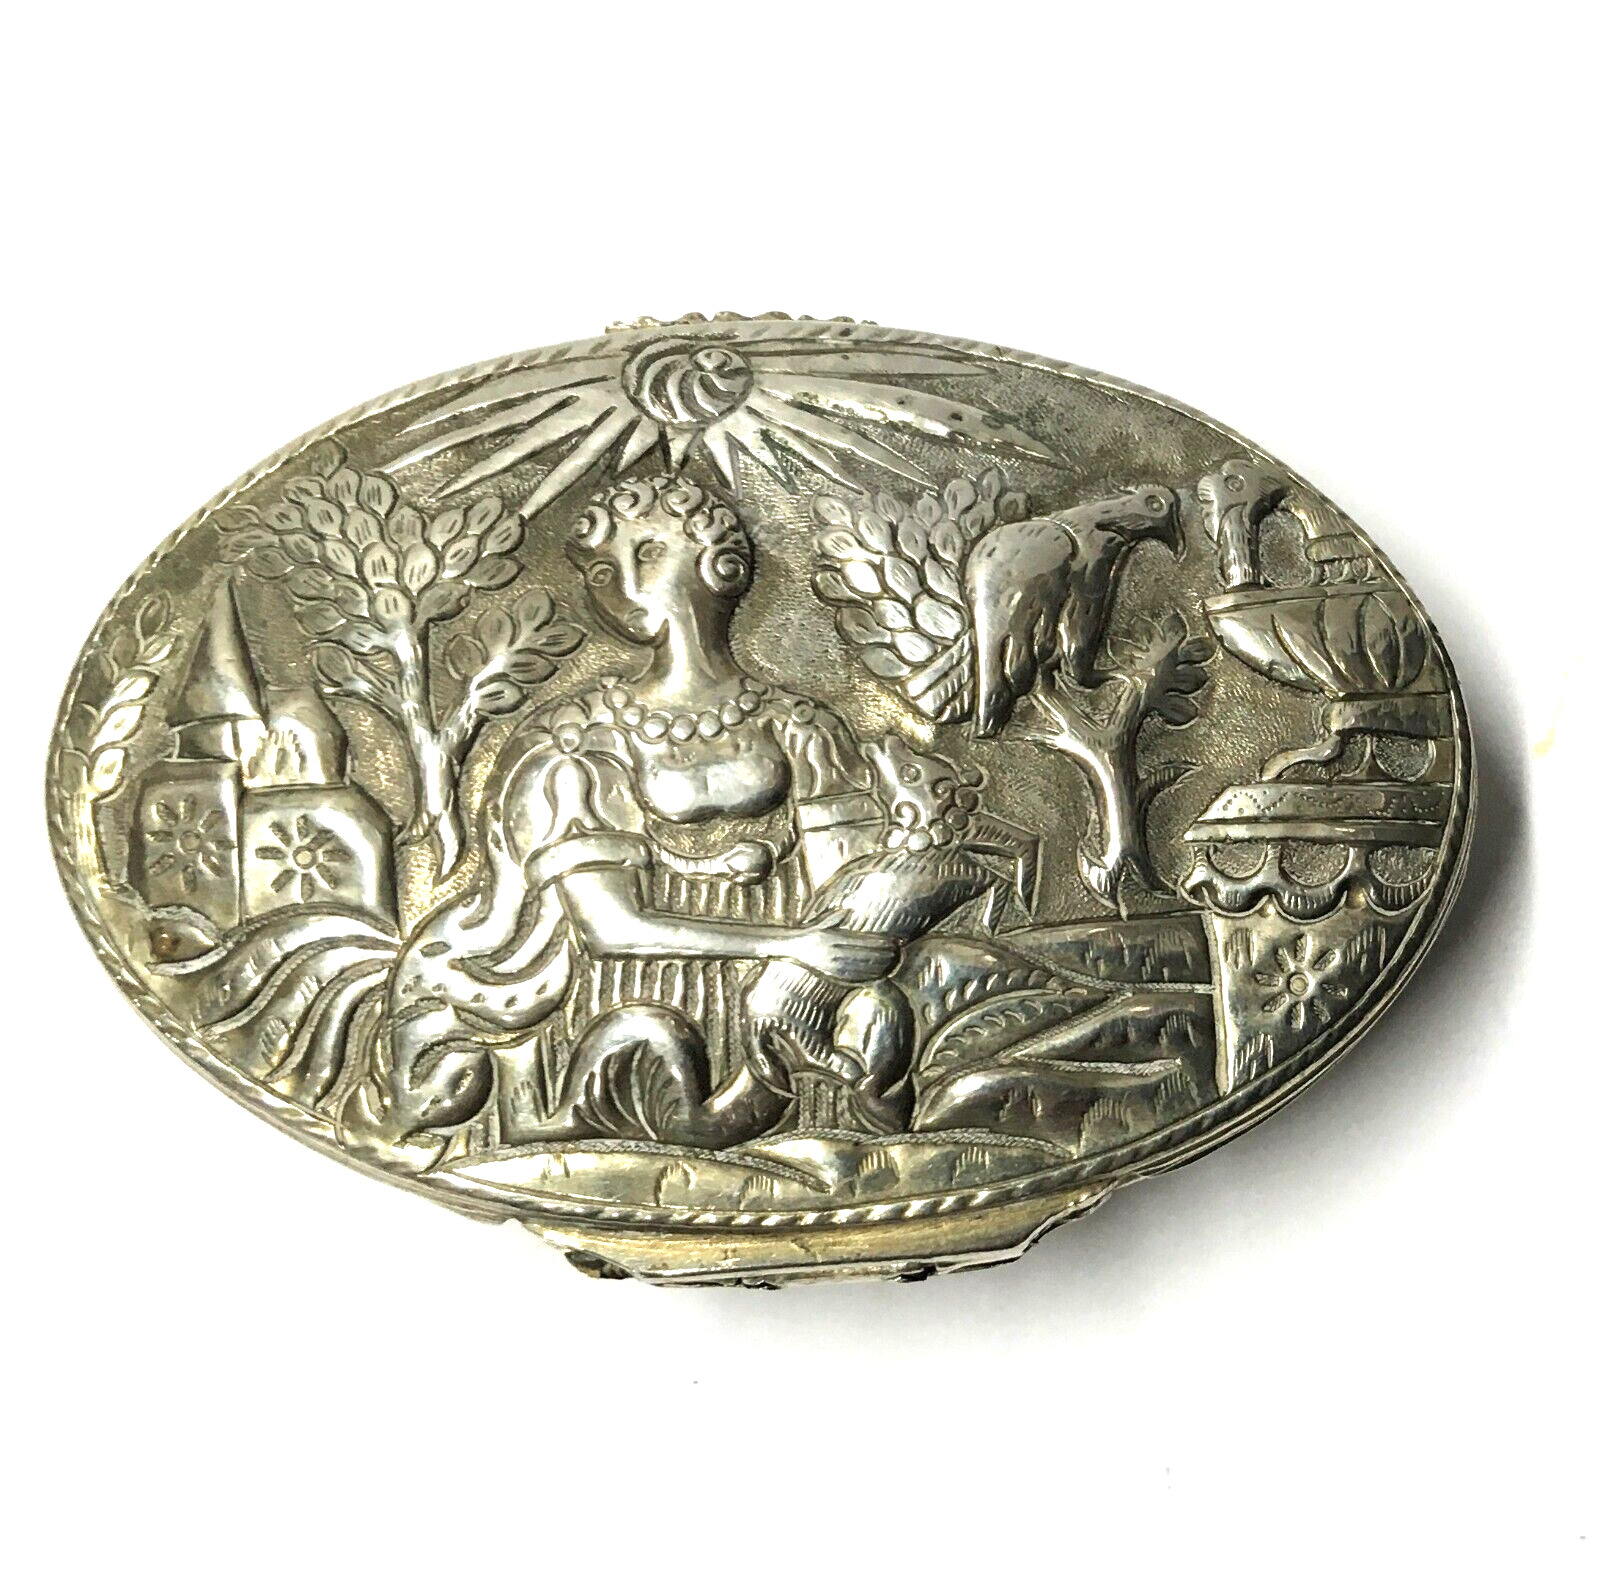 Late 17th c. to Early 18th c. Dutch Silver Snuff or Tobacco Box Highly Repoussé